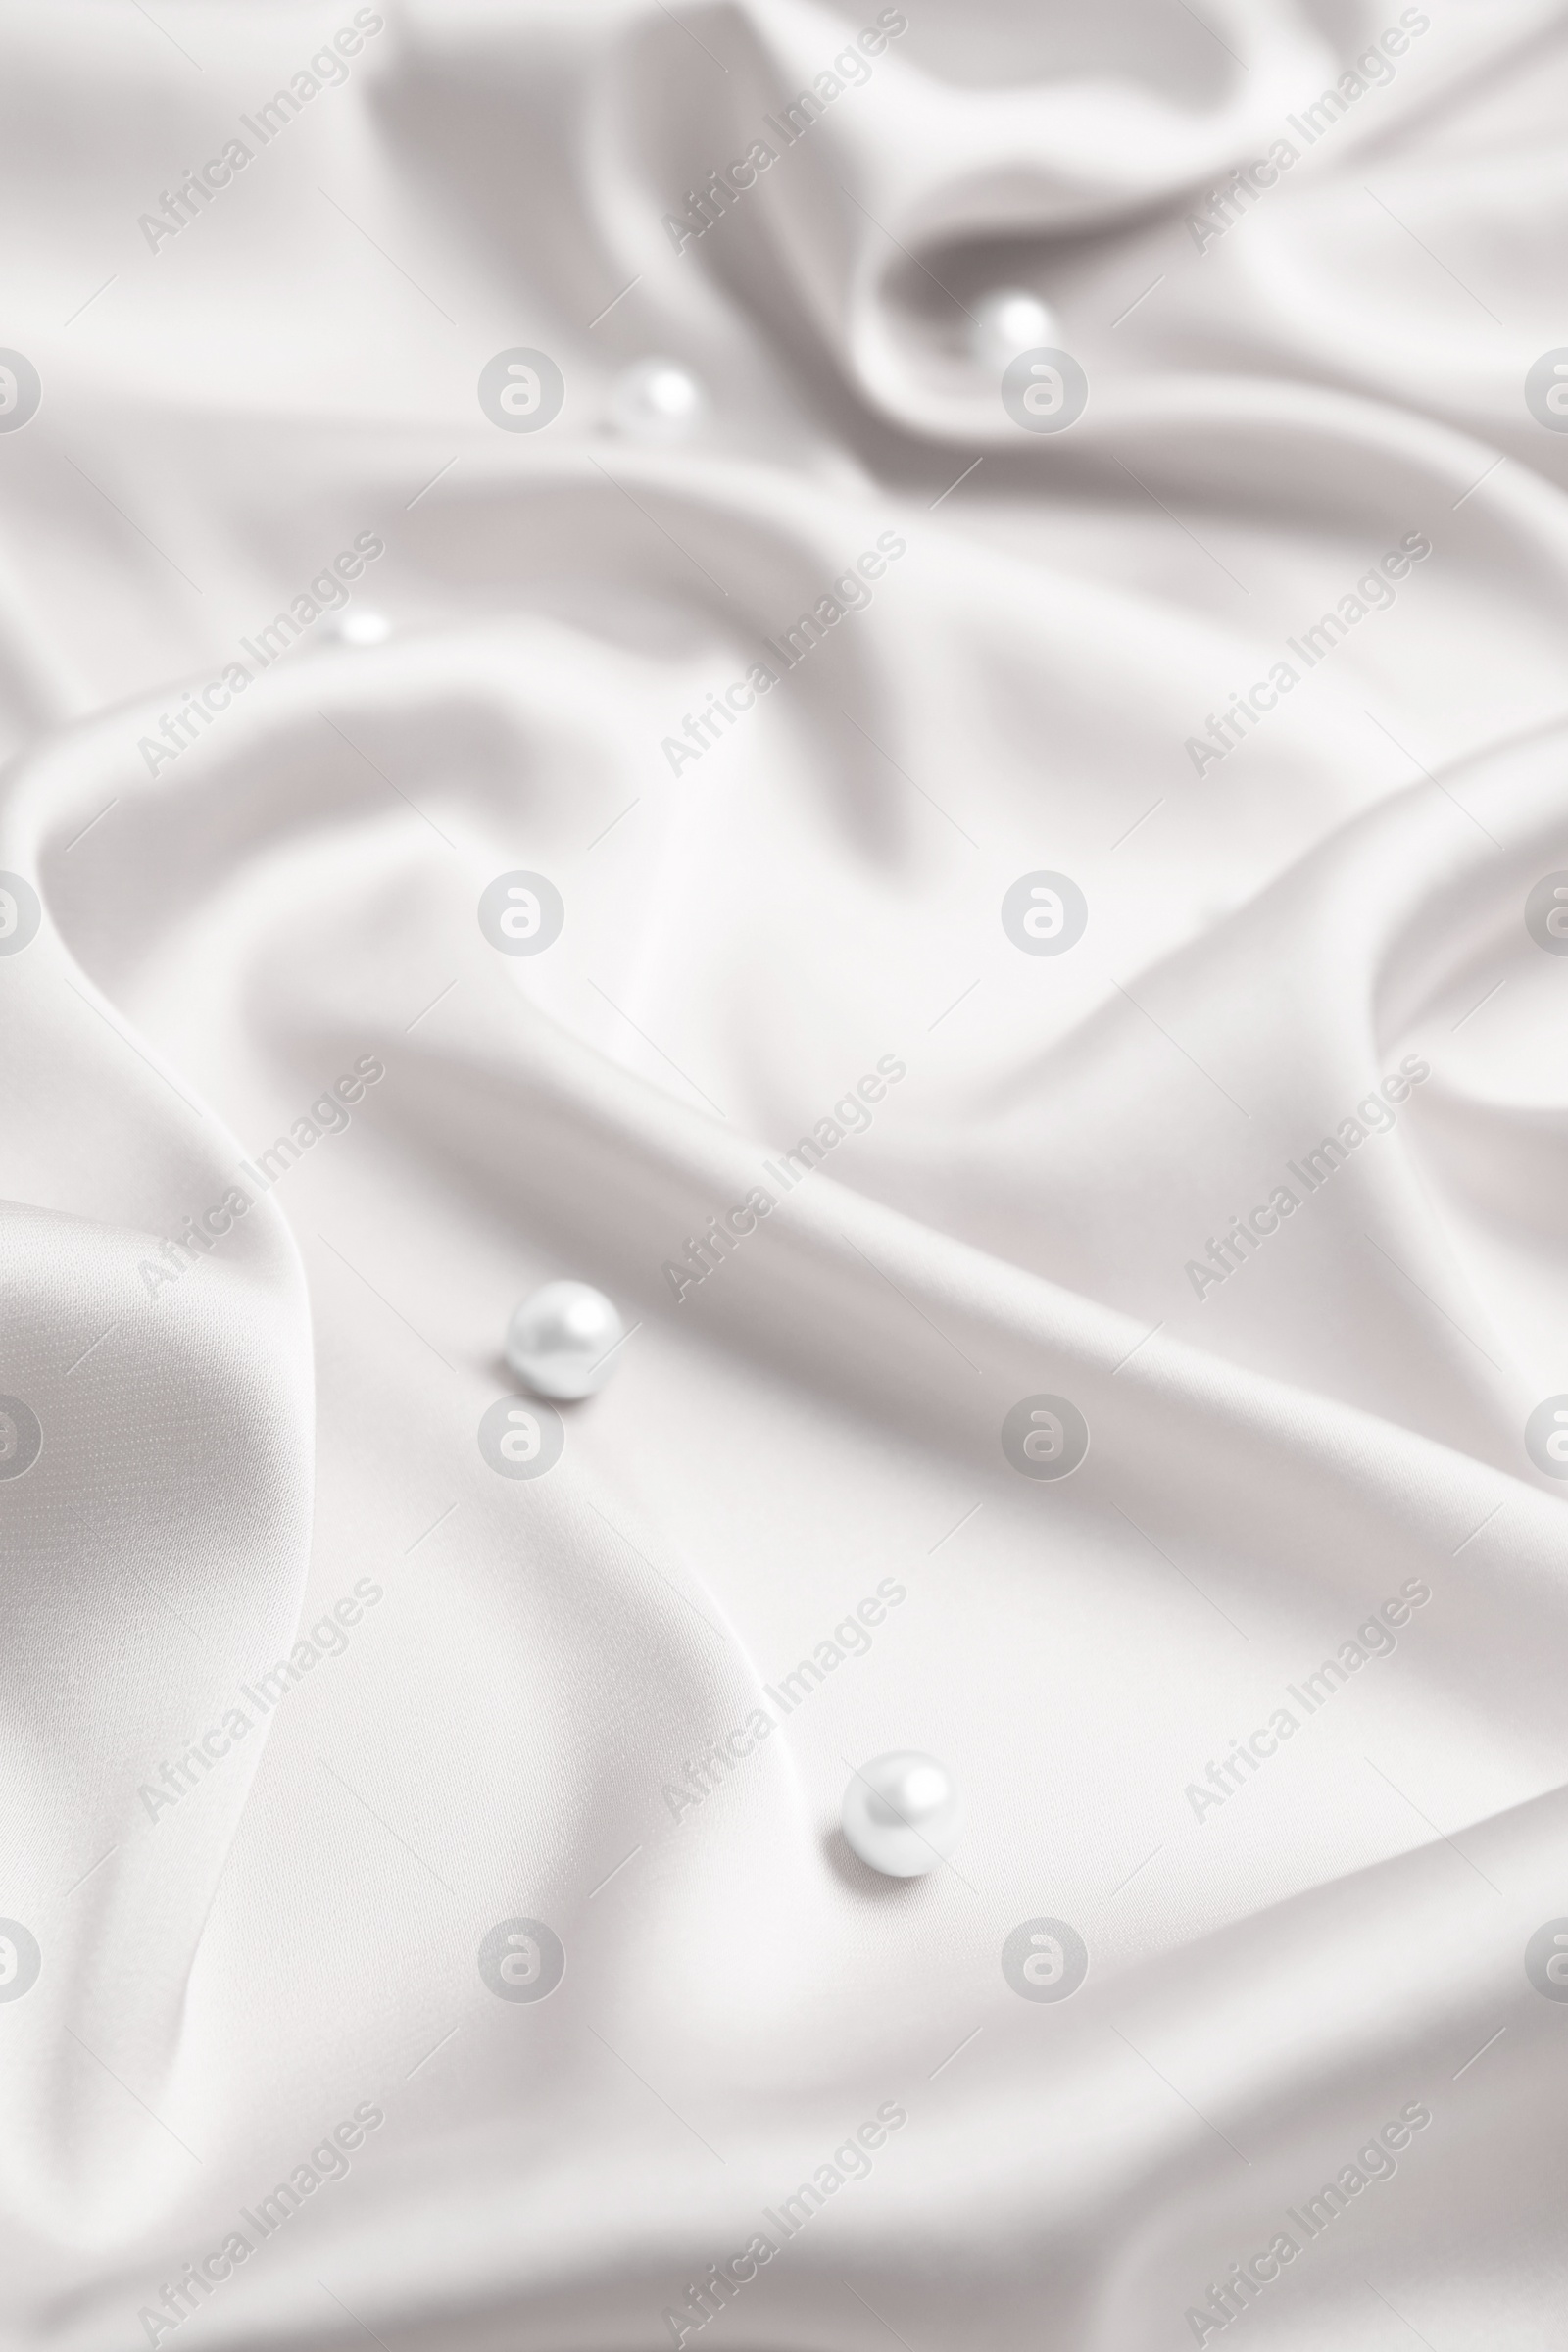 Image of Many beautiful pearls on delicate white silk